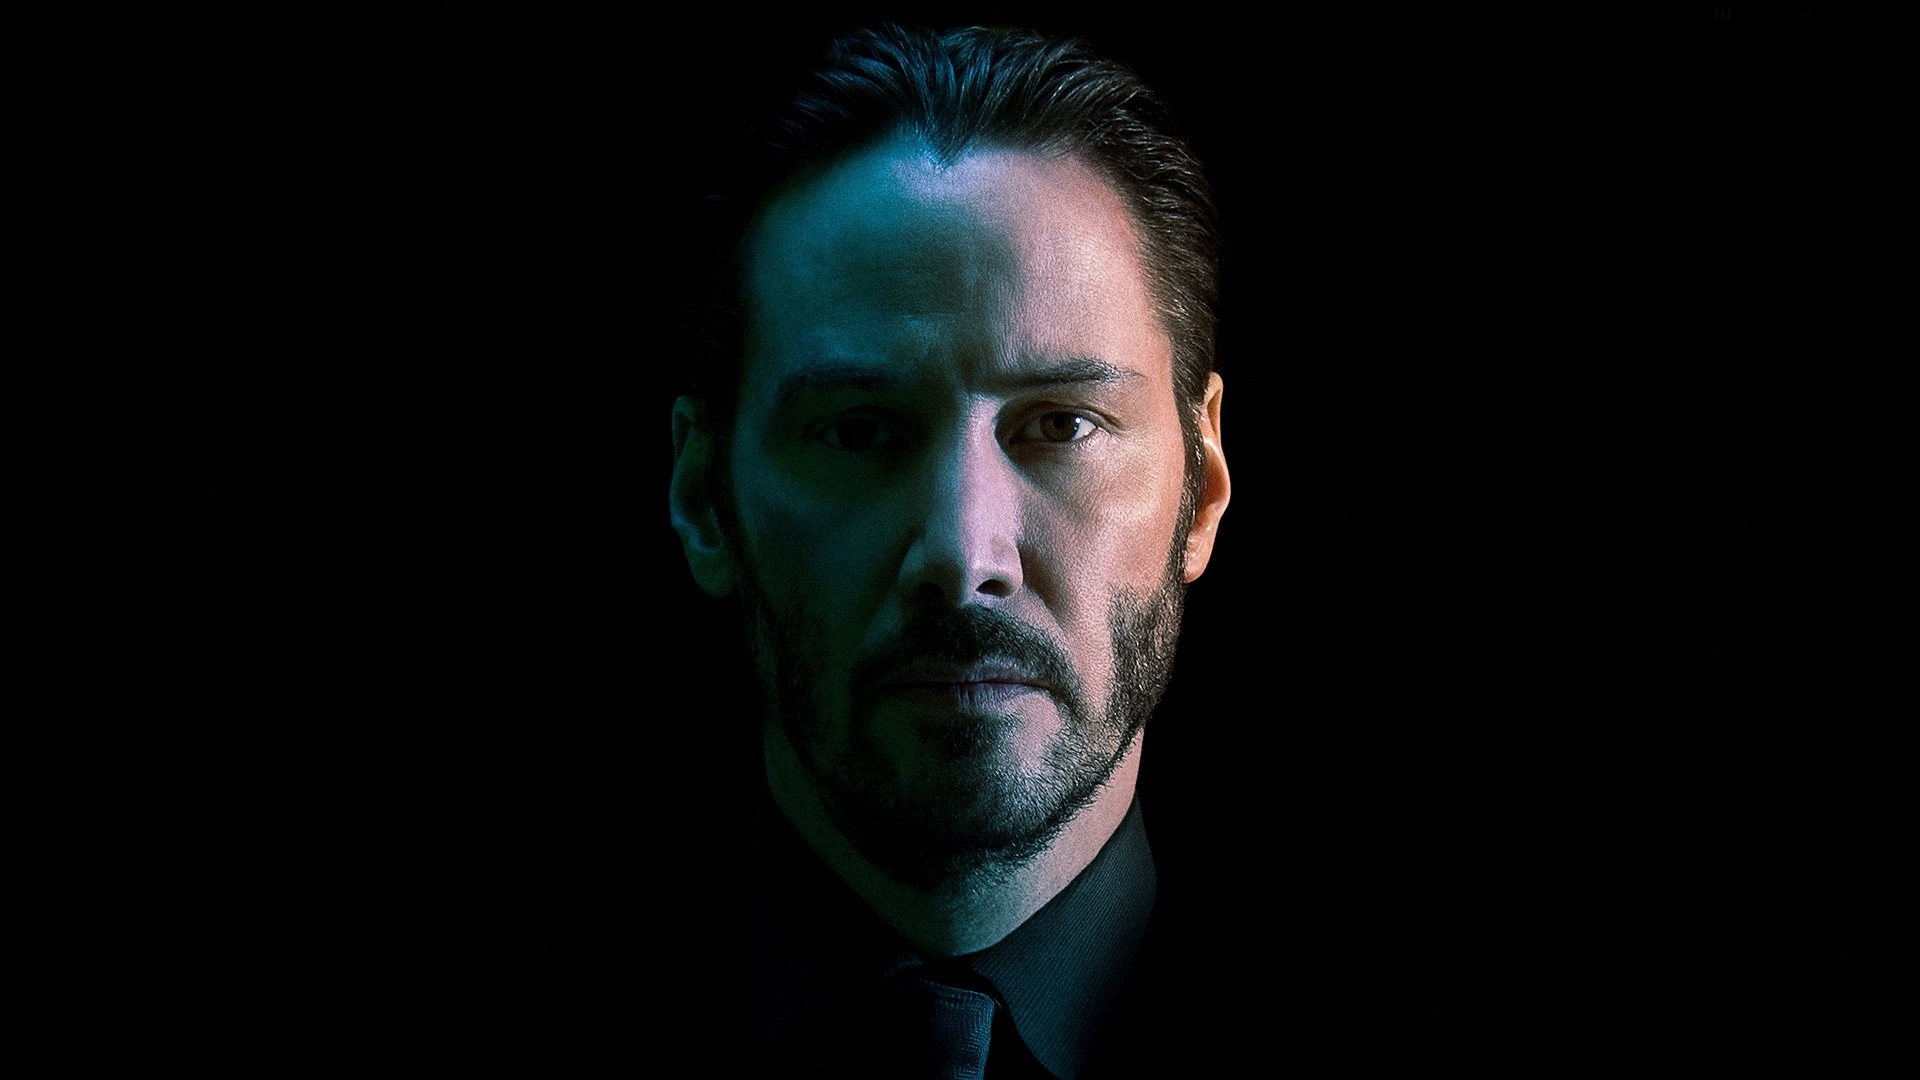 John Wick Hd Images Hot Sex Picture 2675